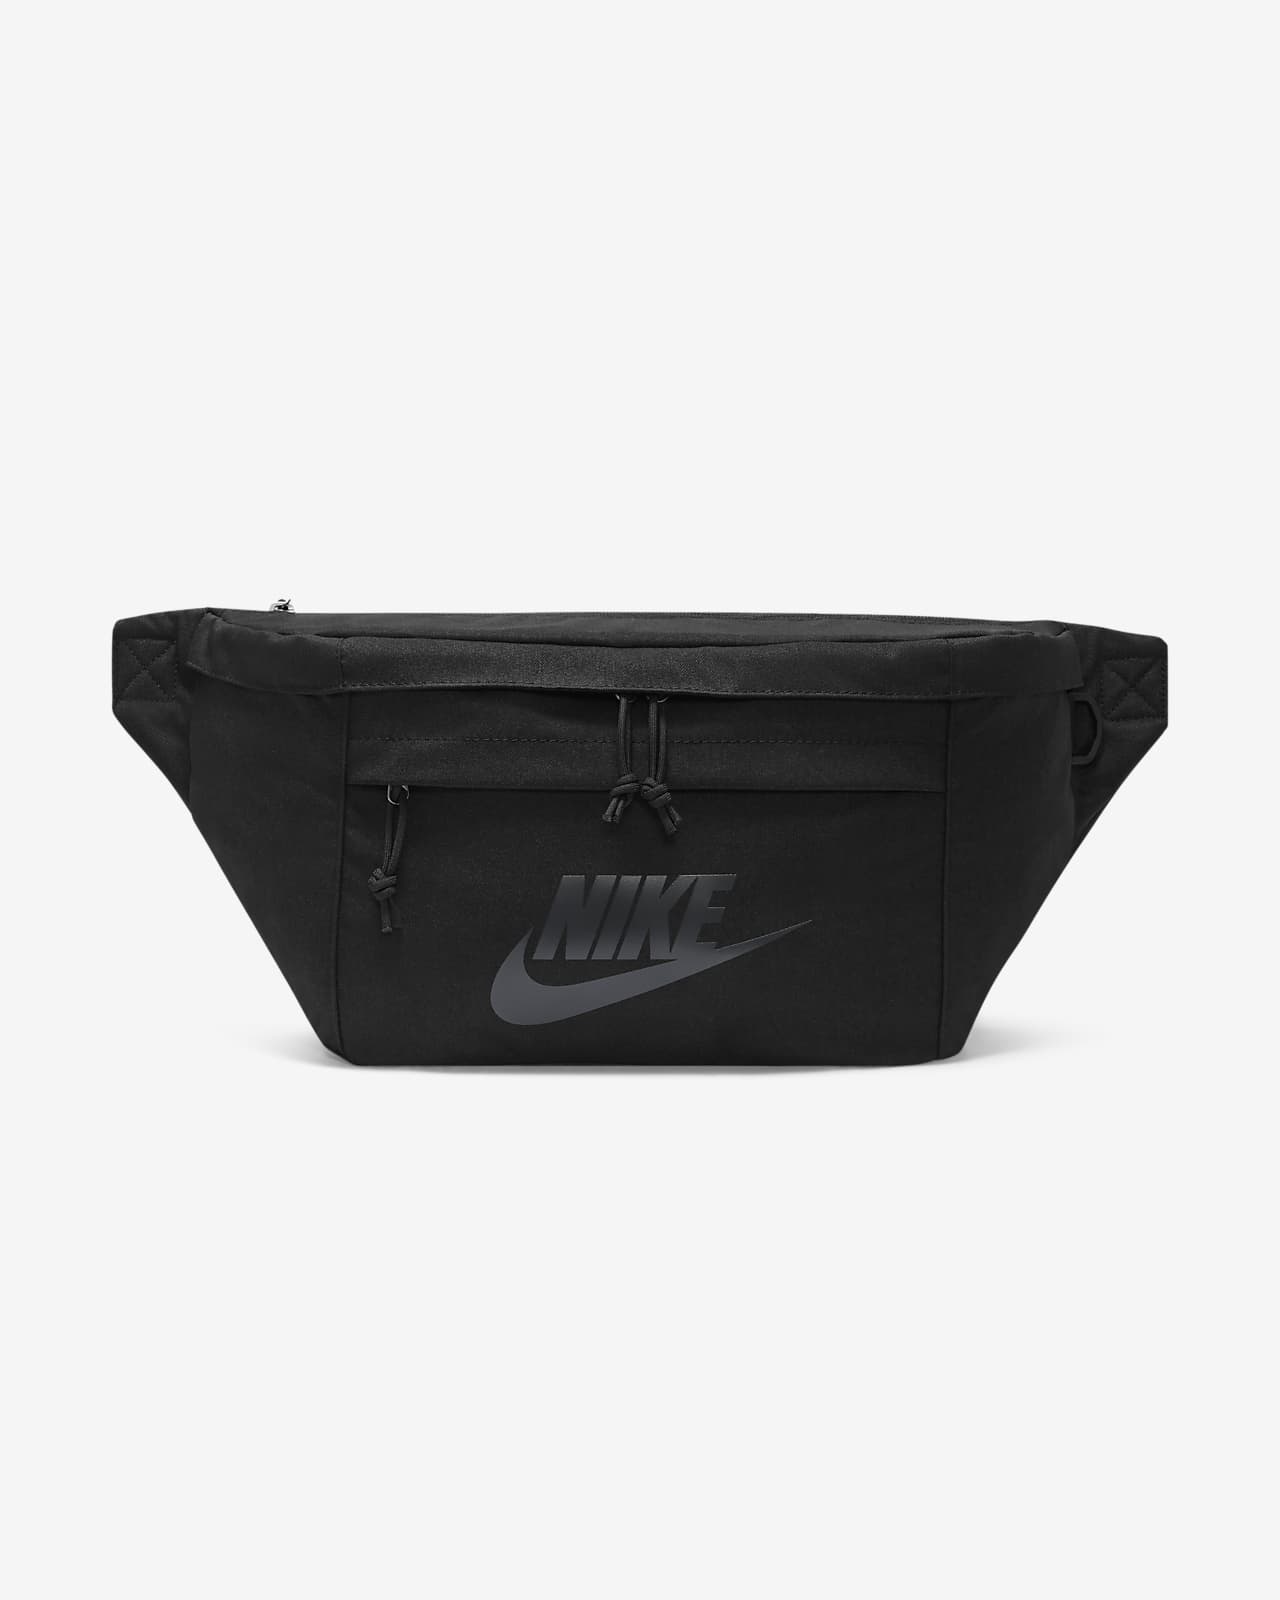 black and gold nike fanny pack